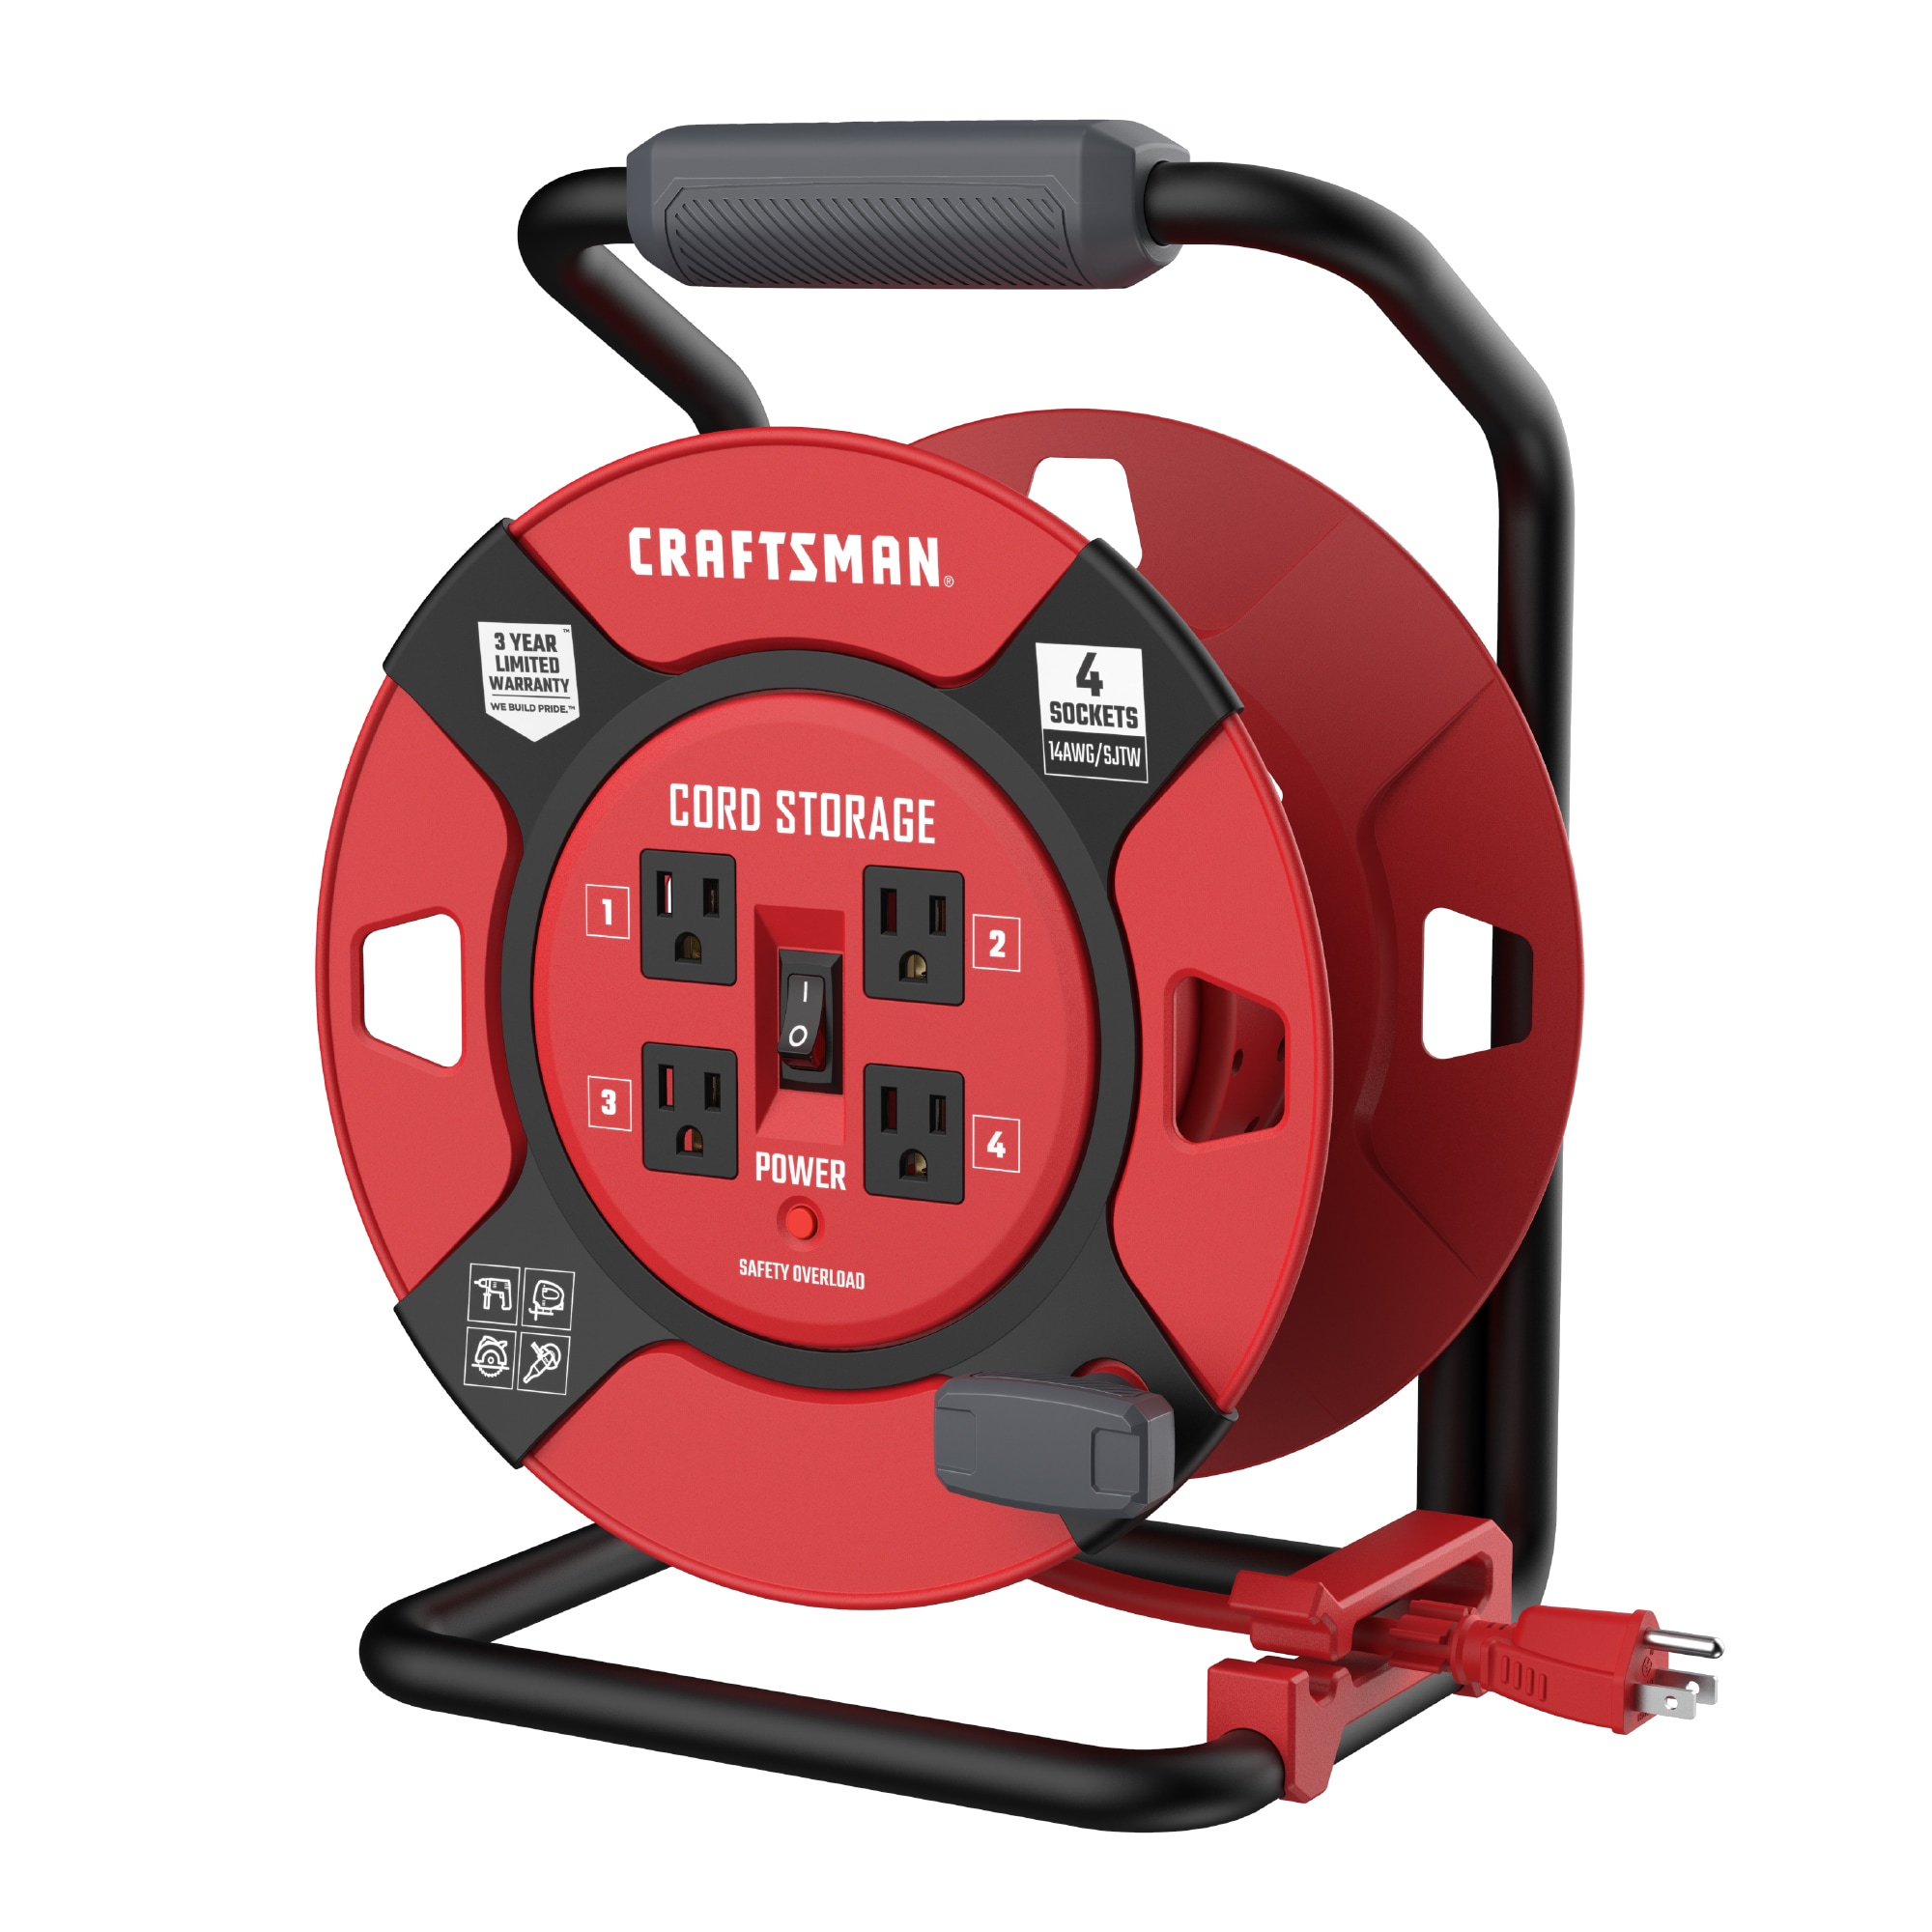 CRAFTSMAN Heavy Cable Management Reel, 1 Ft Cord with 4 Outlets